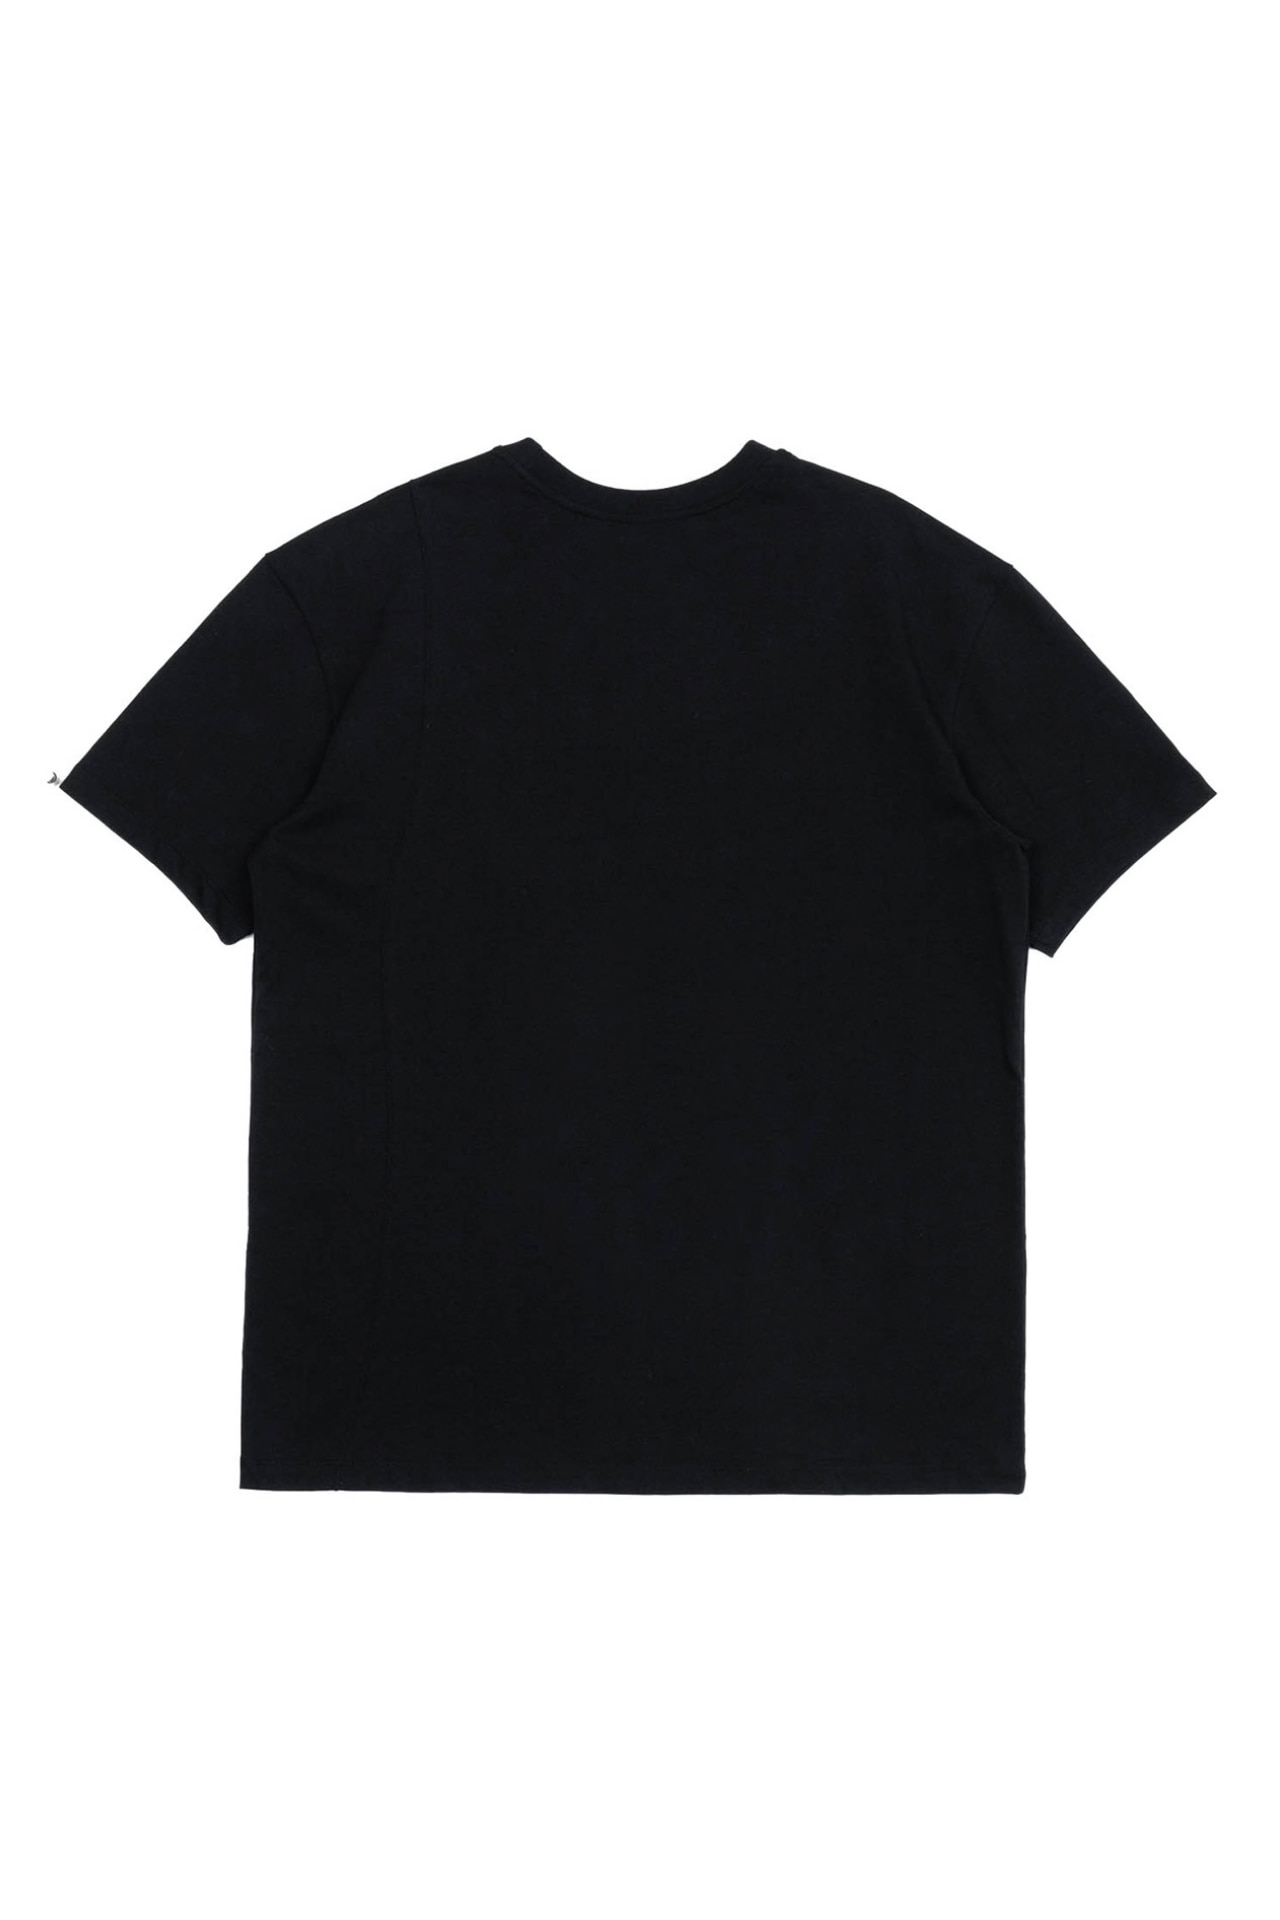 [2nd Restock] OUR T-SHIRT BLACK